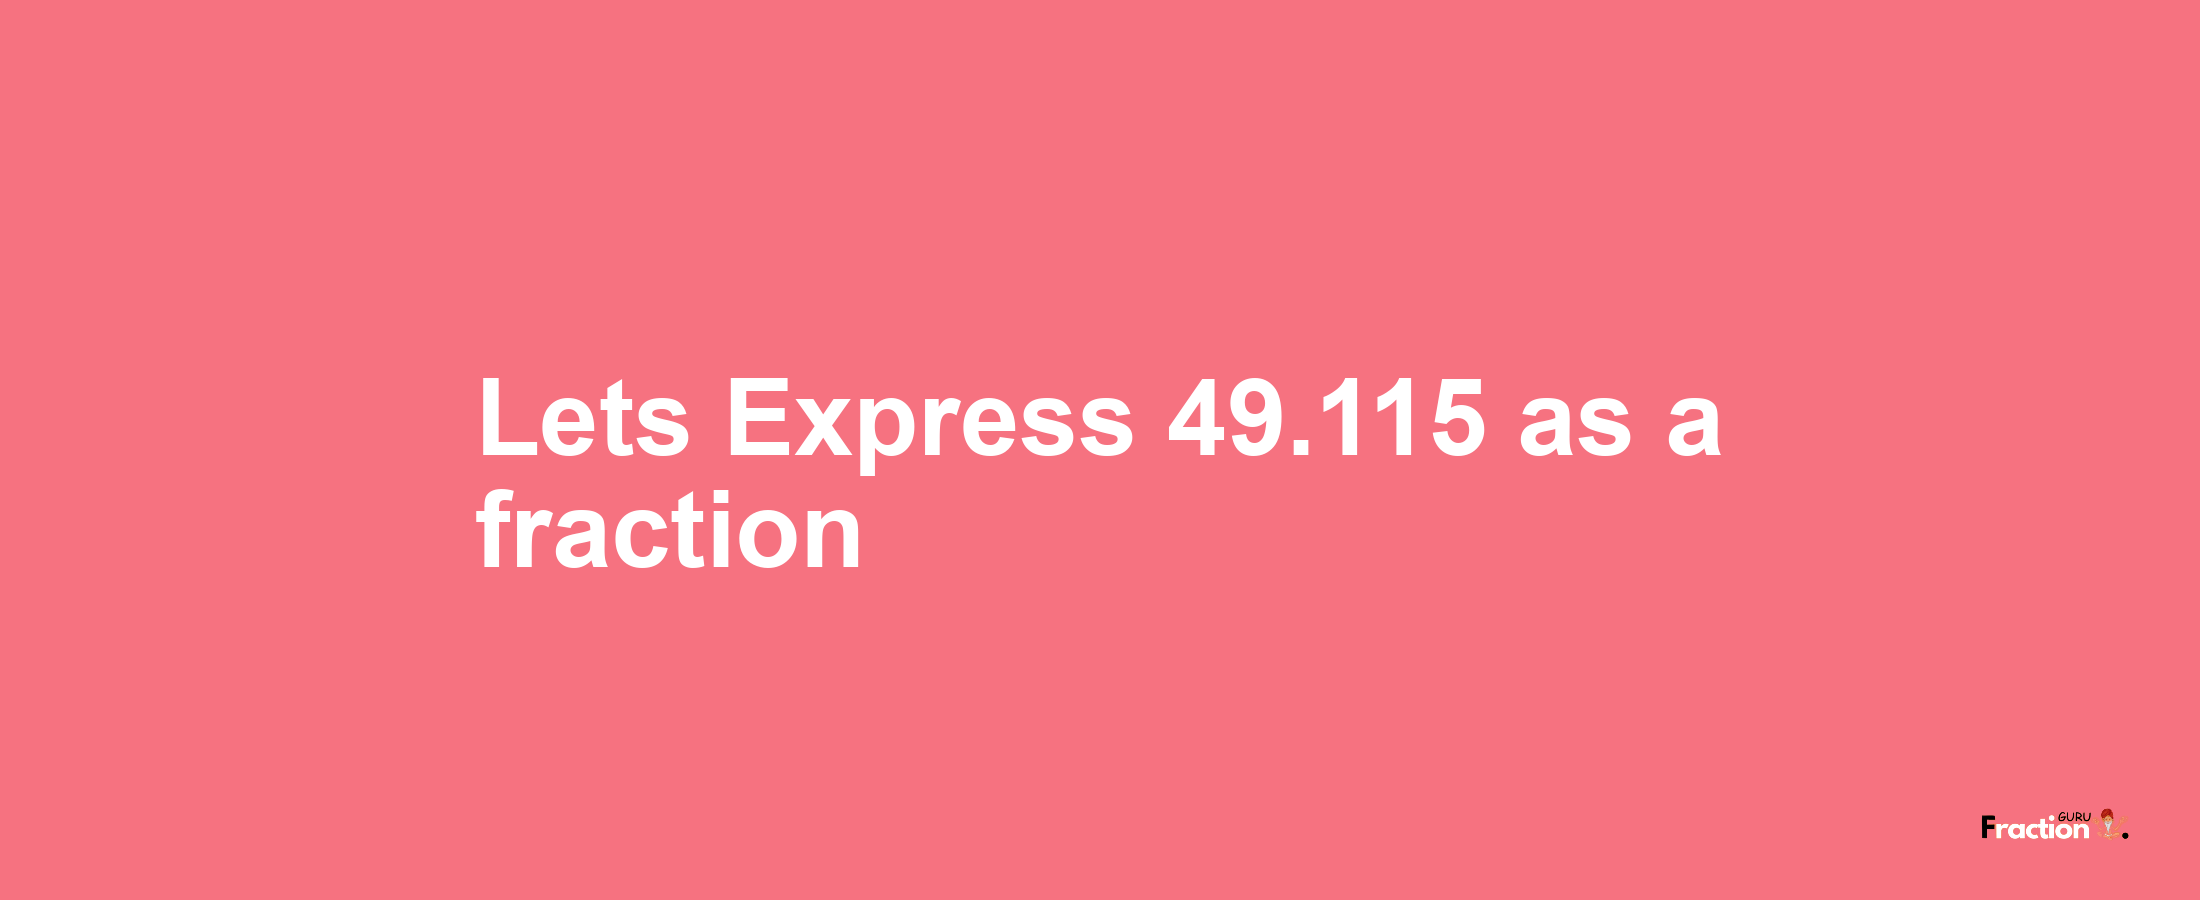 Lets Express 49.115 as afraction